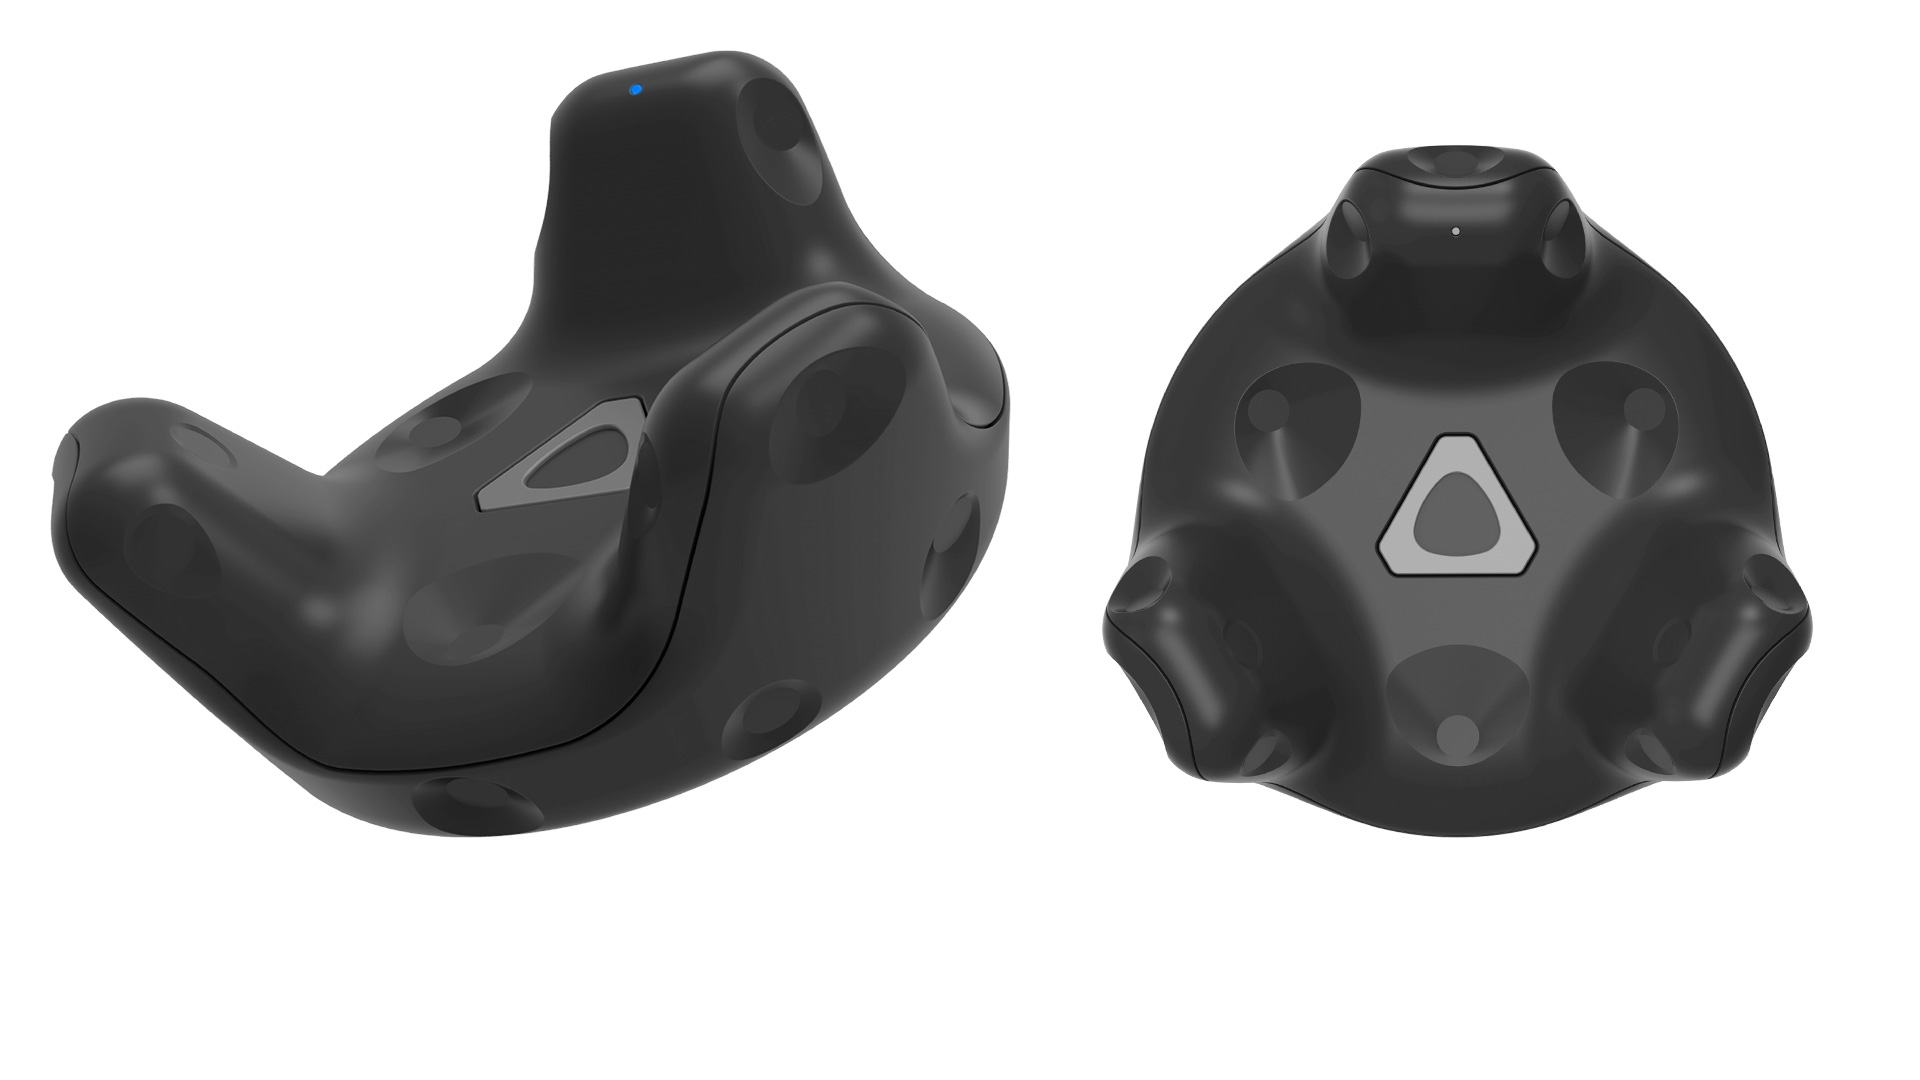 horisont ørn Himlen HTC to Give Away 1,000 Vive Trackers to Developers Ahead of Launch